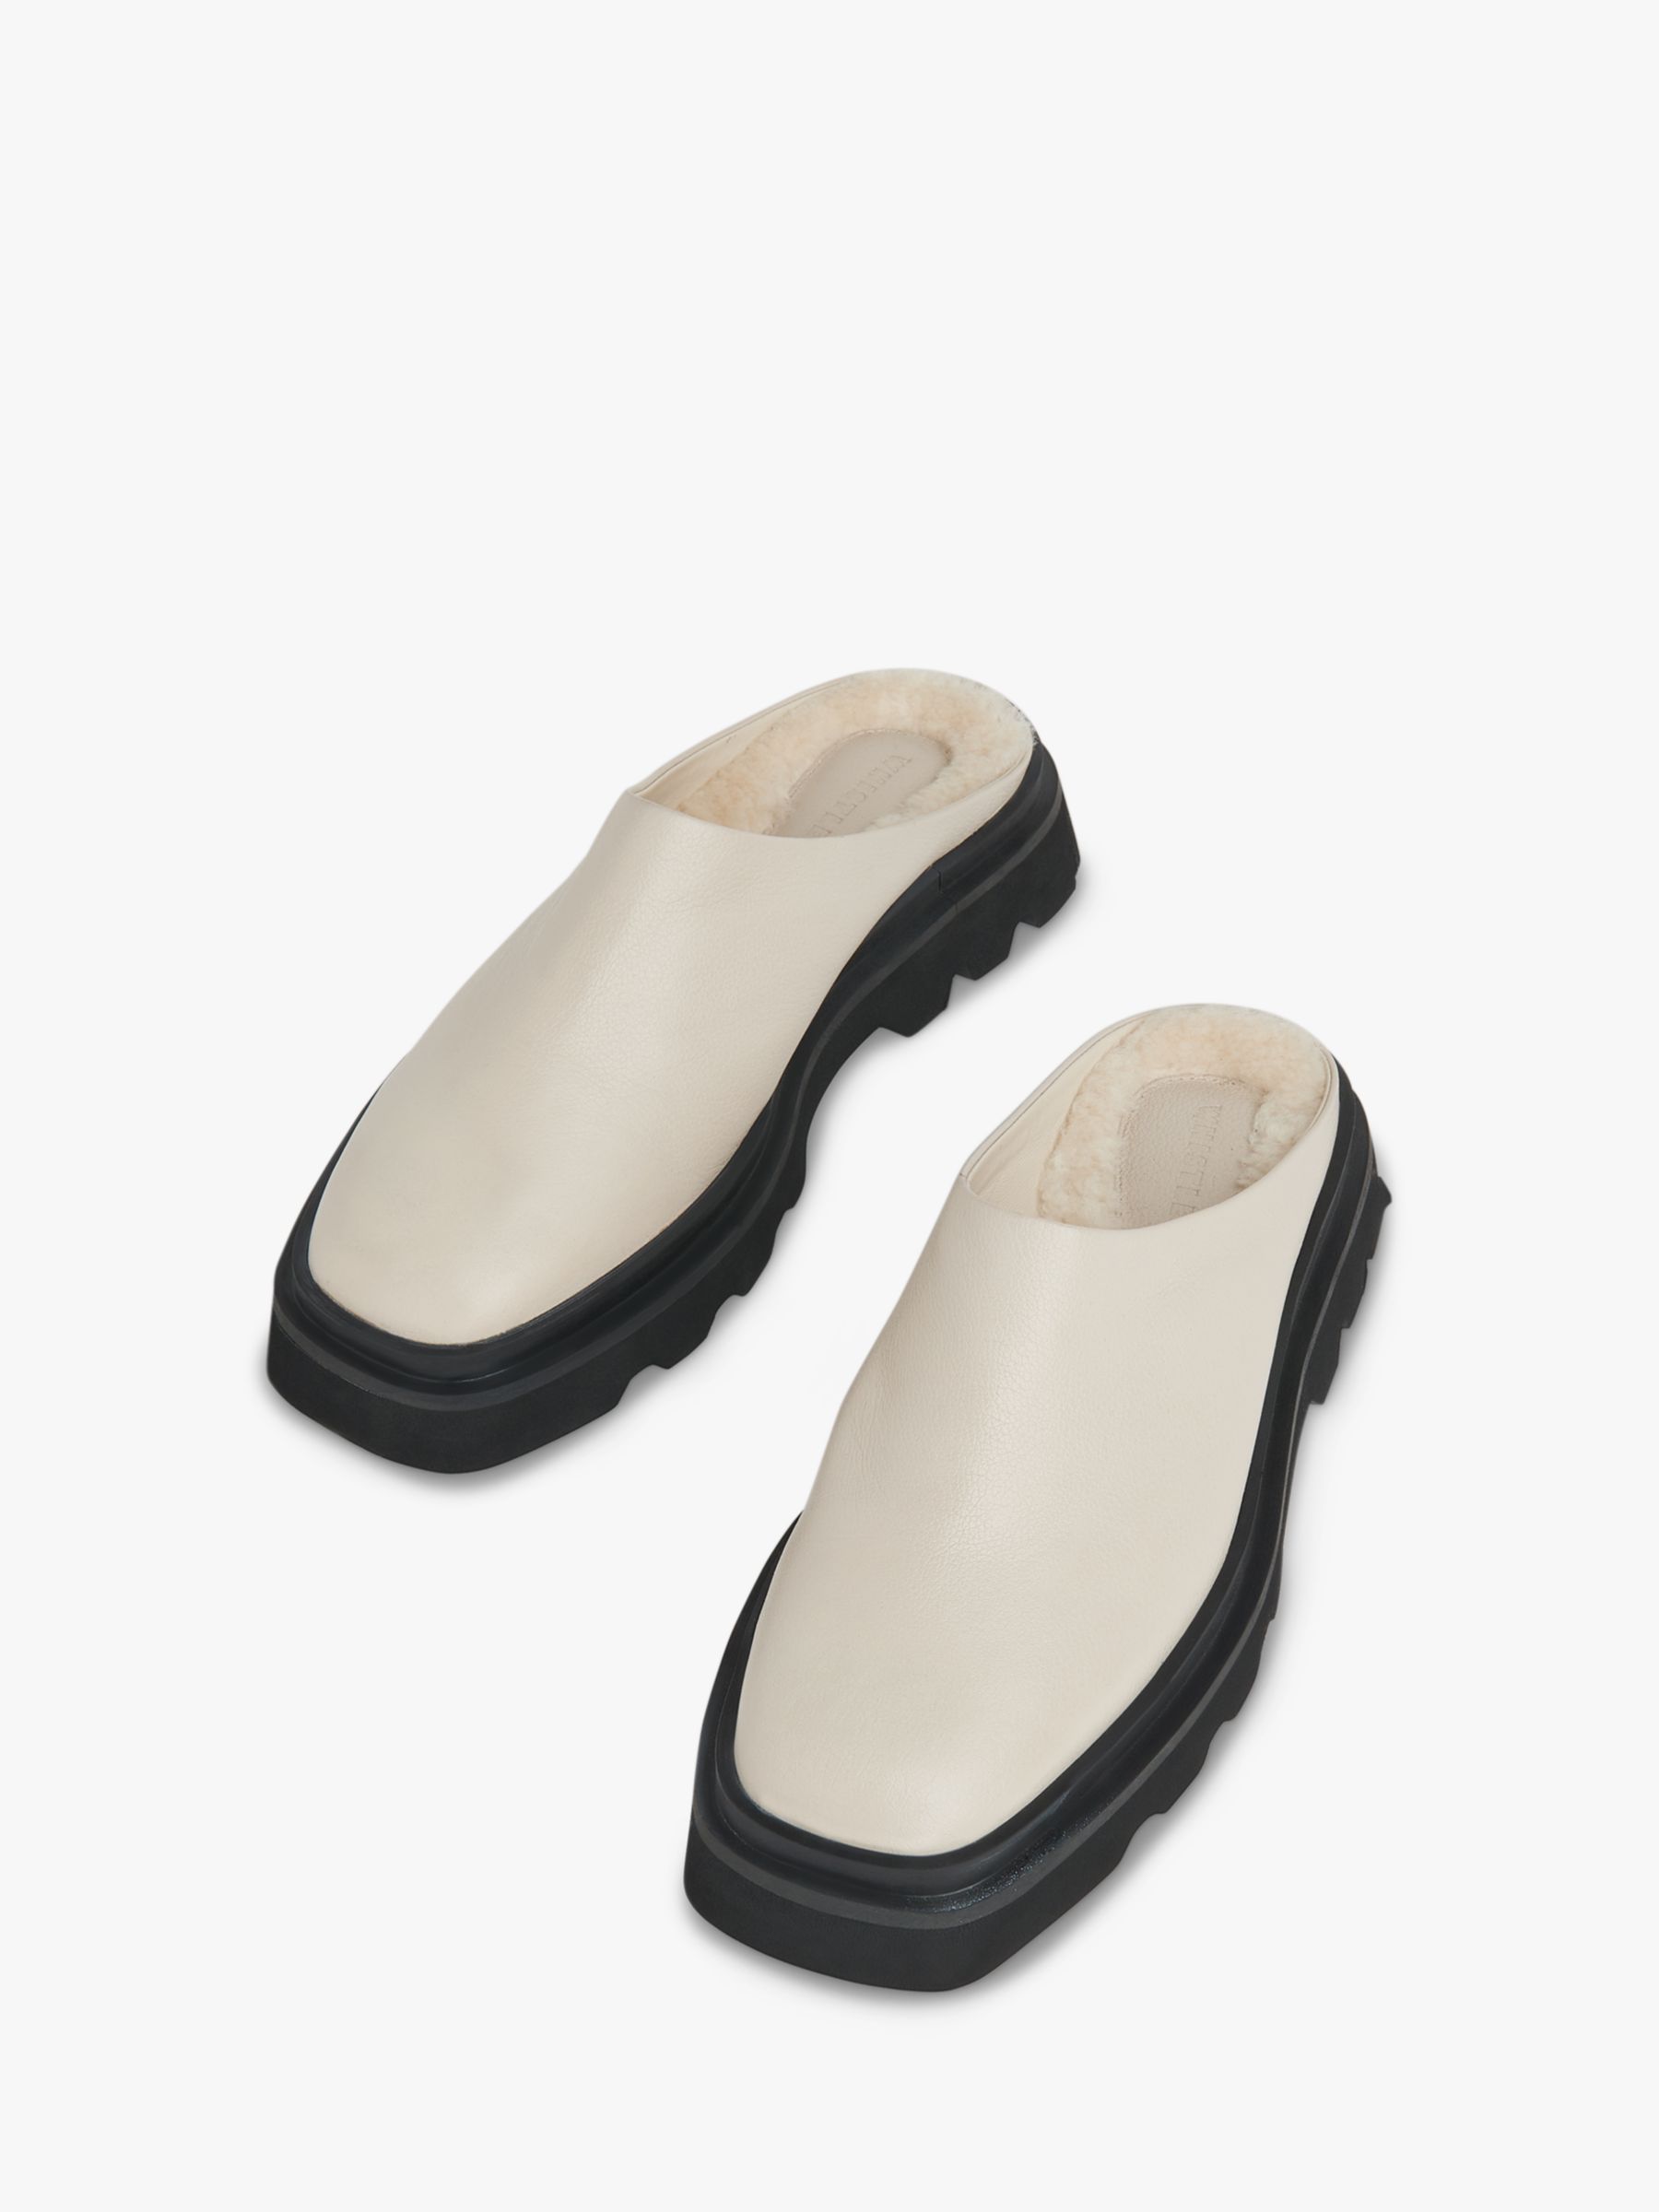 Whistles Lanie Shearling Lined Mules, Ivory at John Lewis & Partners